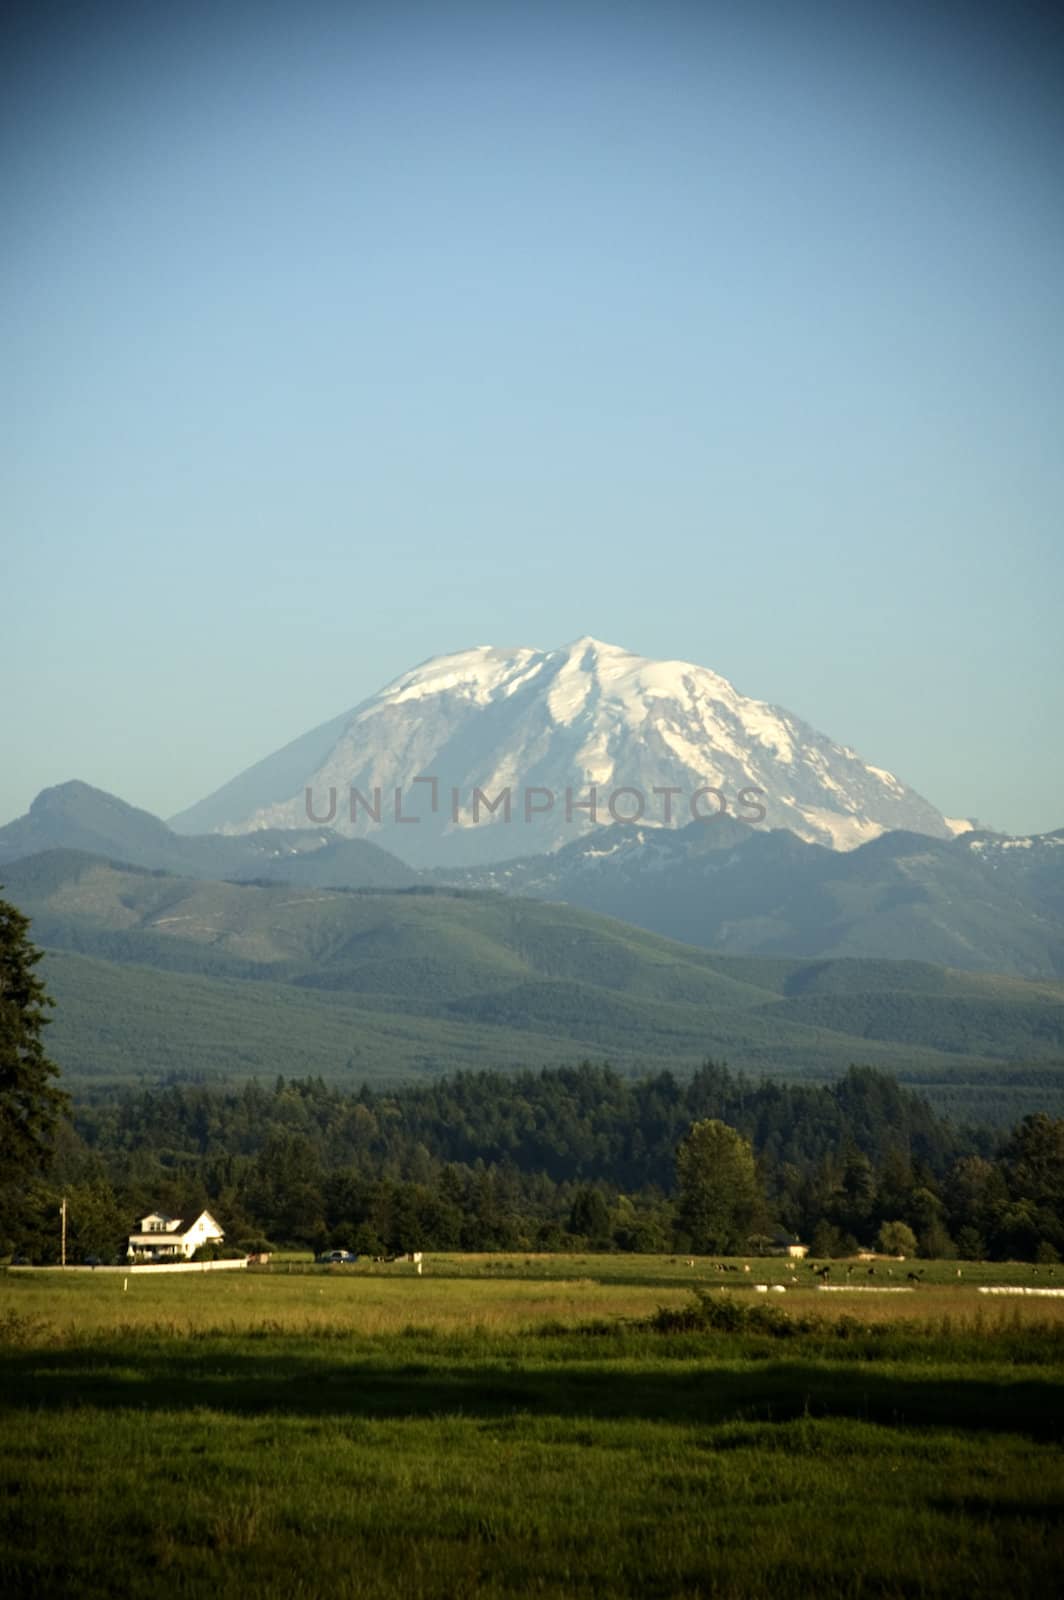 Mount Rainier towers over a picturesque farm with cattle and fields near Enumclaw, Washington.